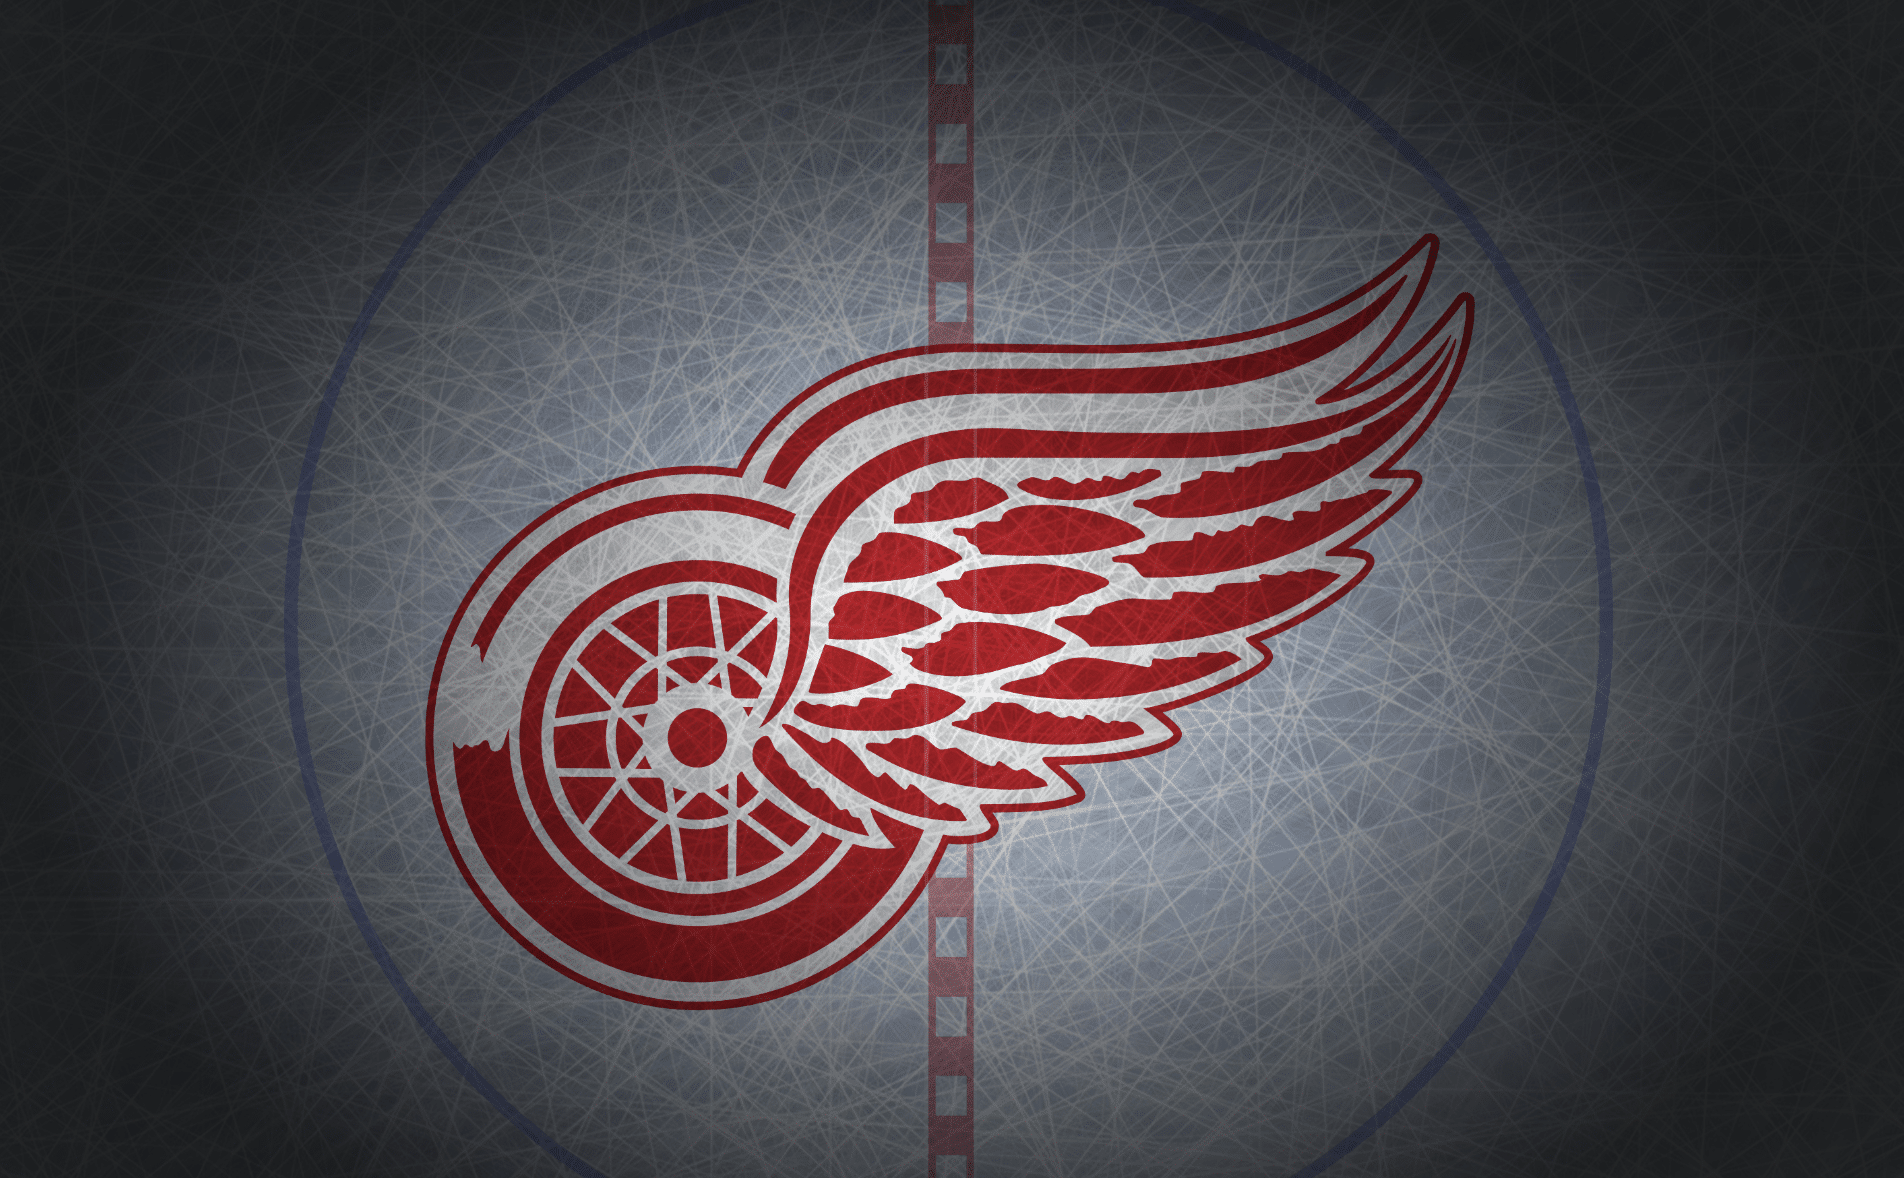 Red Wings will make the playoffs